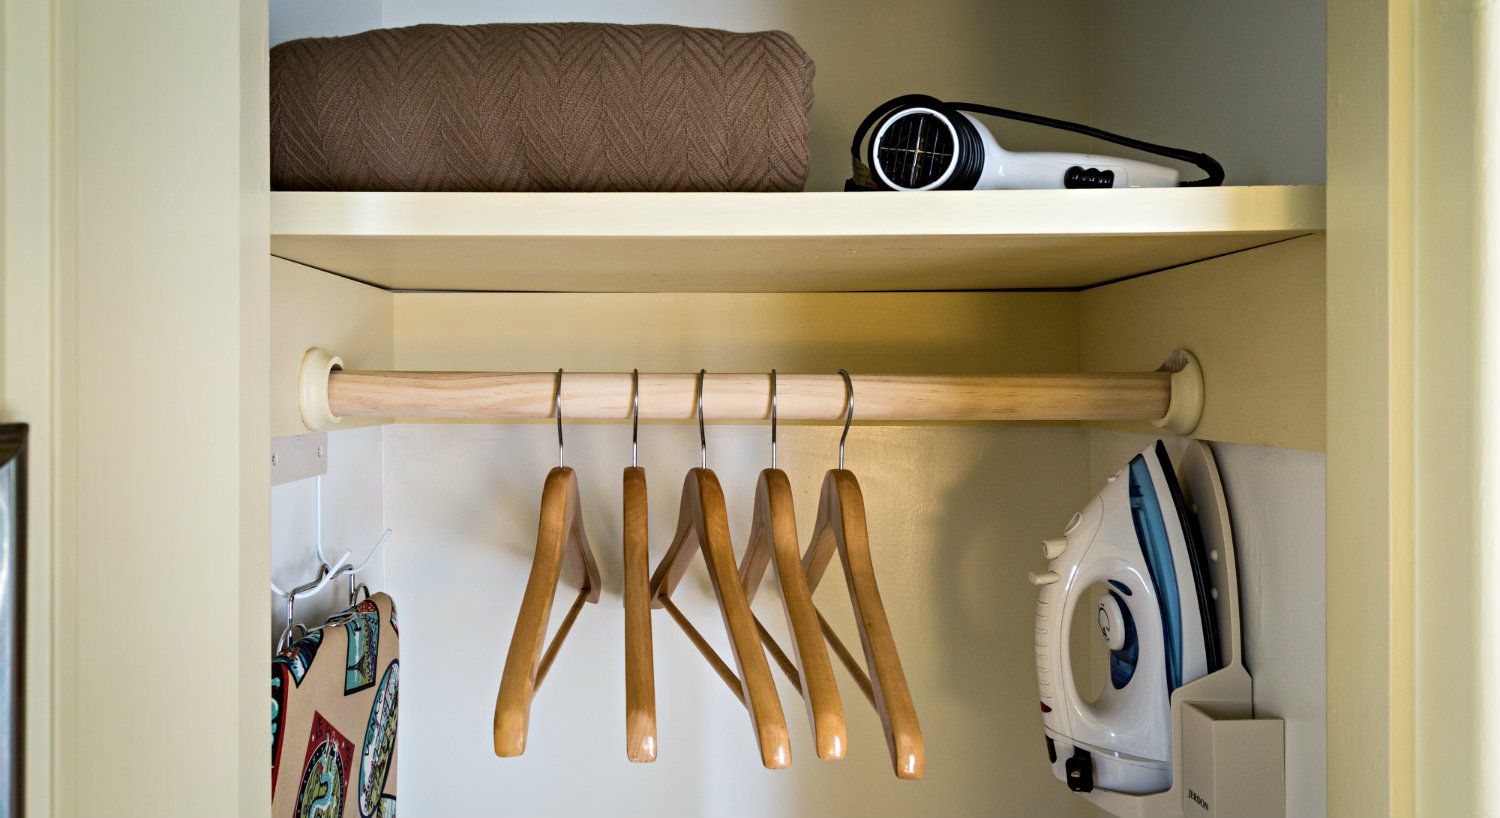 An open closet which holds wooden hangers, and iron and ironing board and extra blankets.